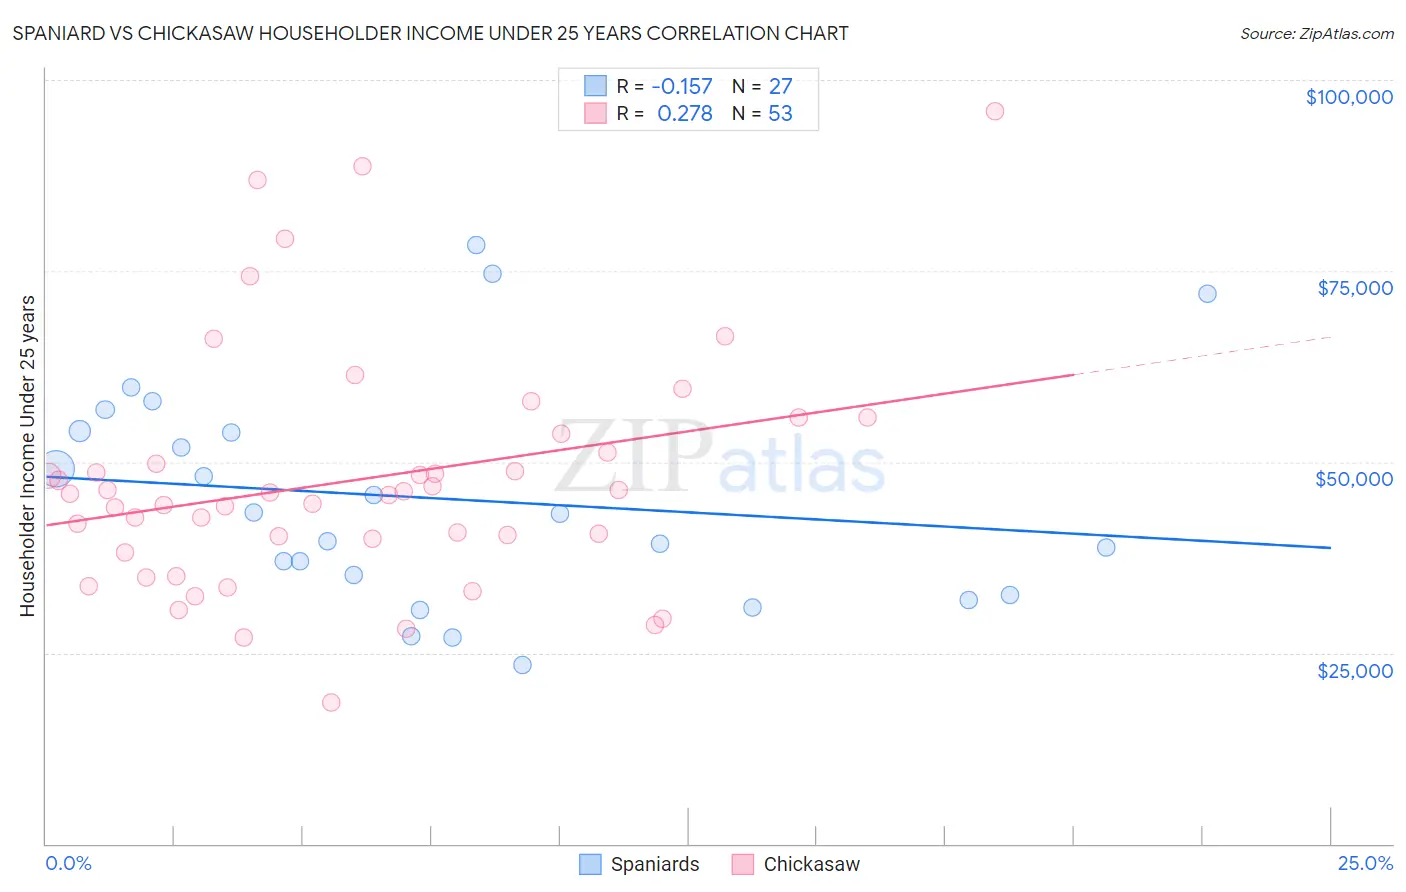 Spaniard vs Chickasaw Householder Income Under 25 years